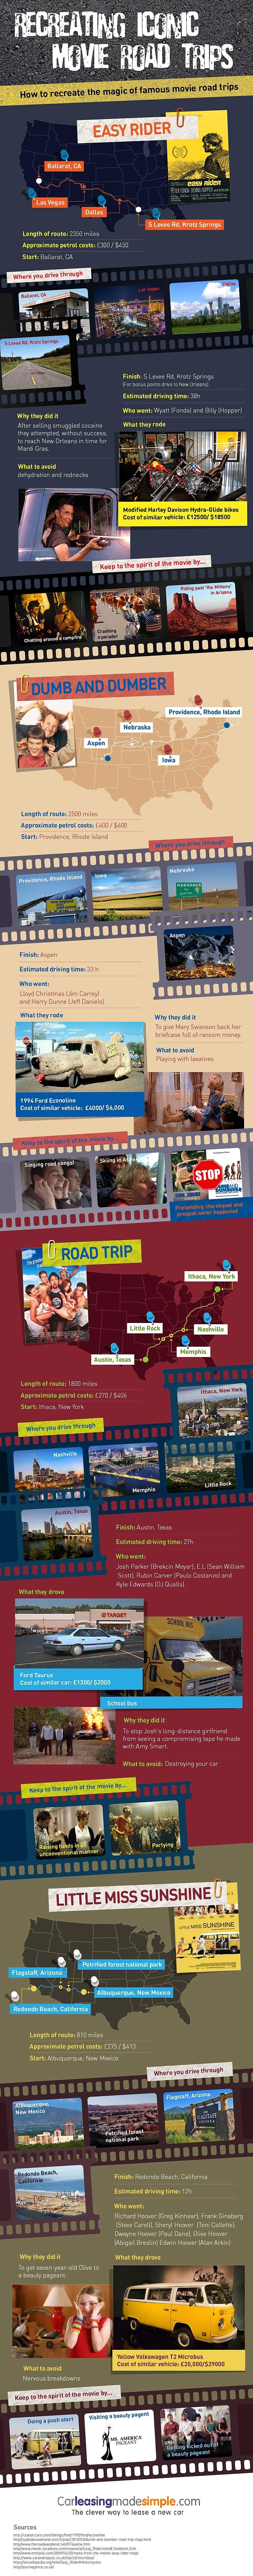 4 famous movie road trips you can take